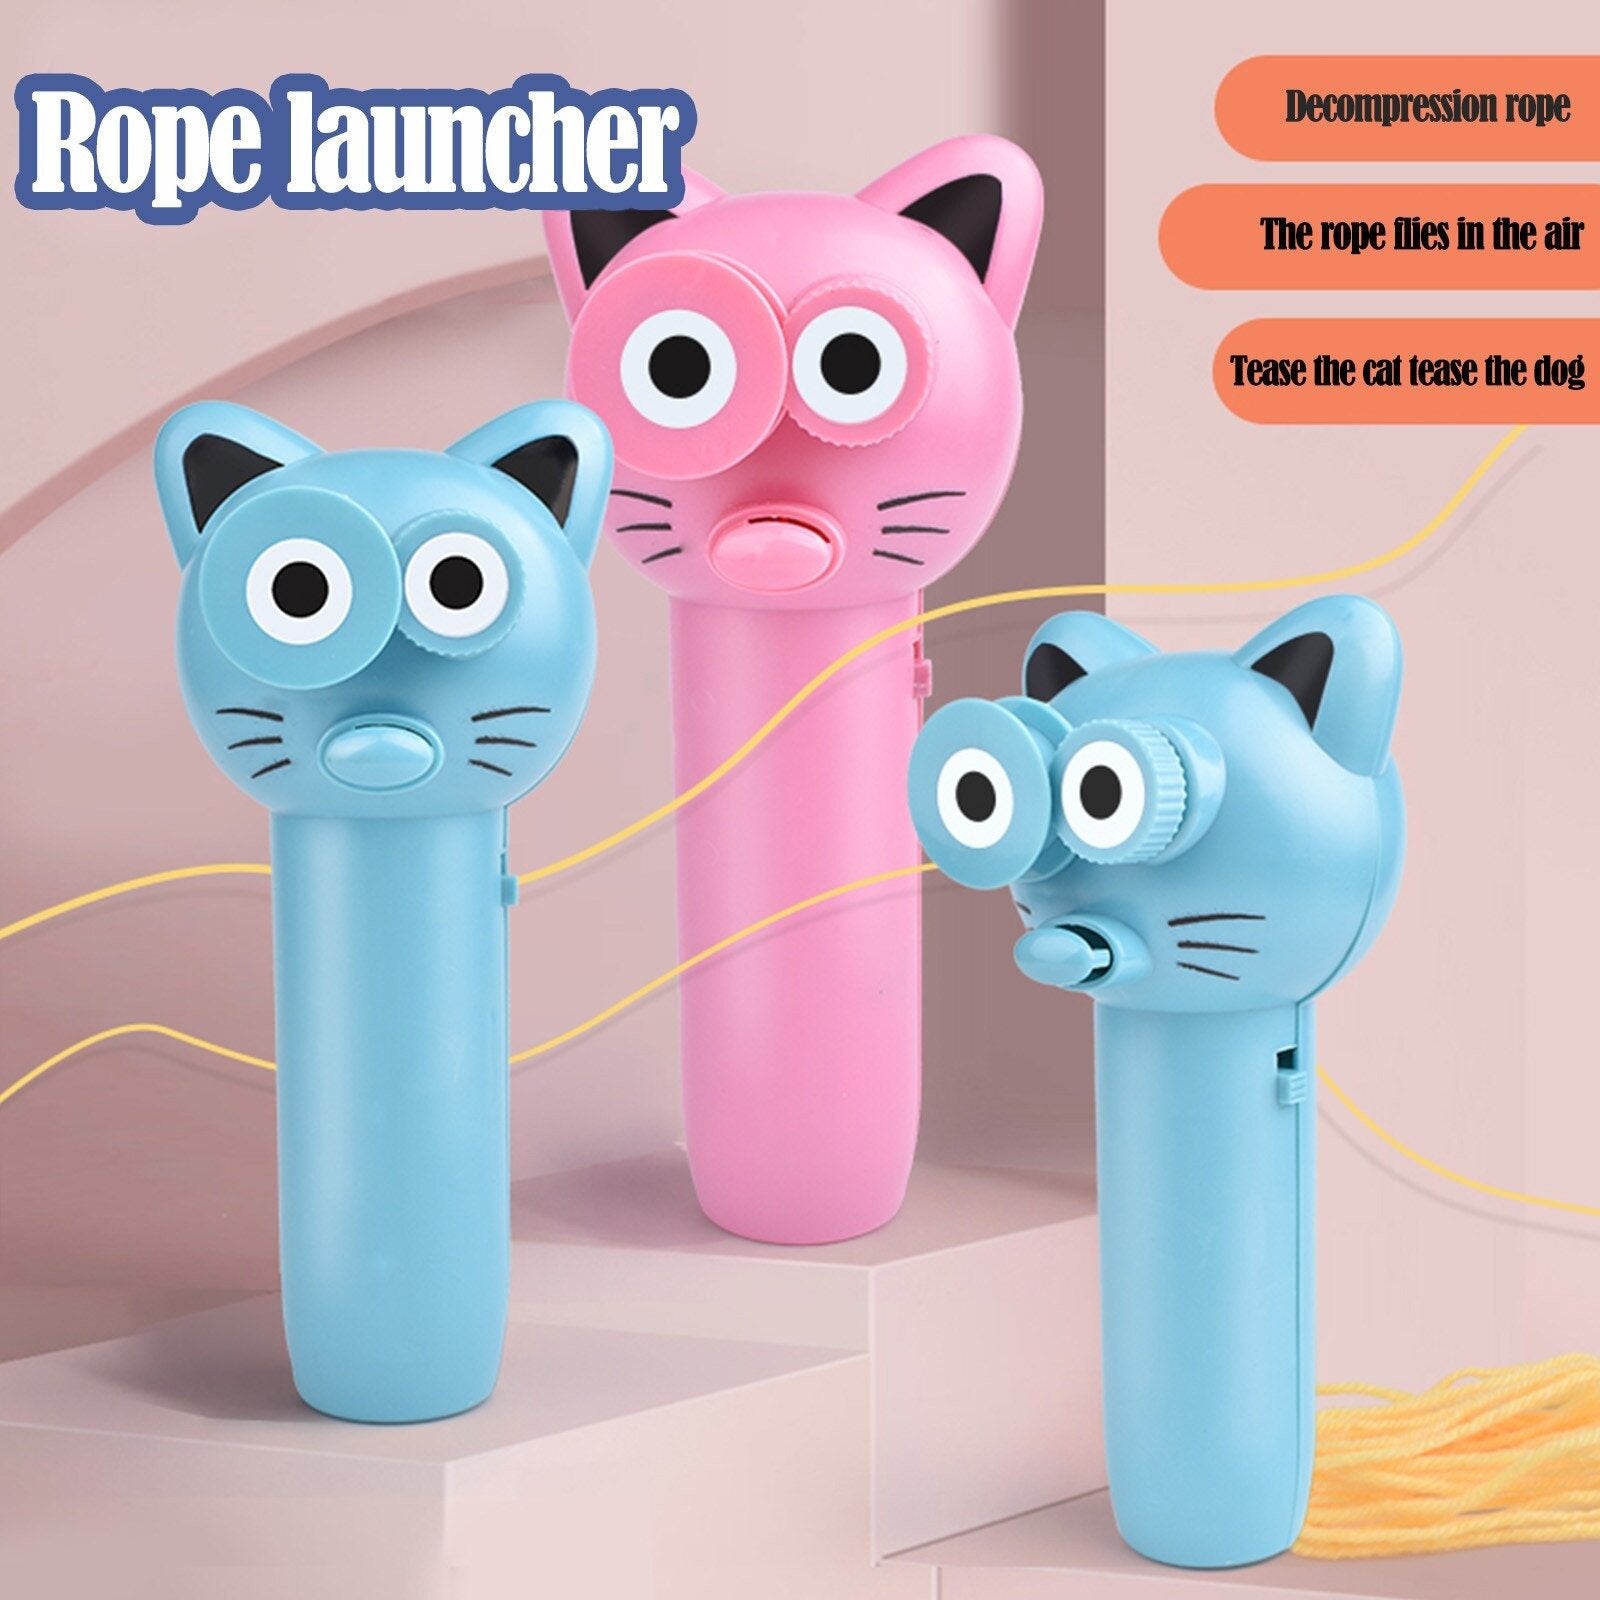 Rope Launcher